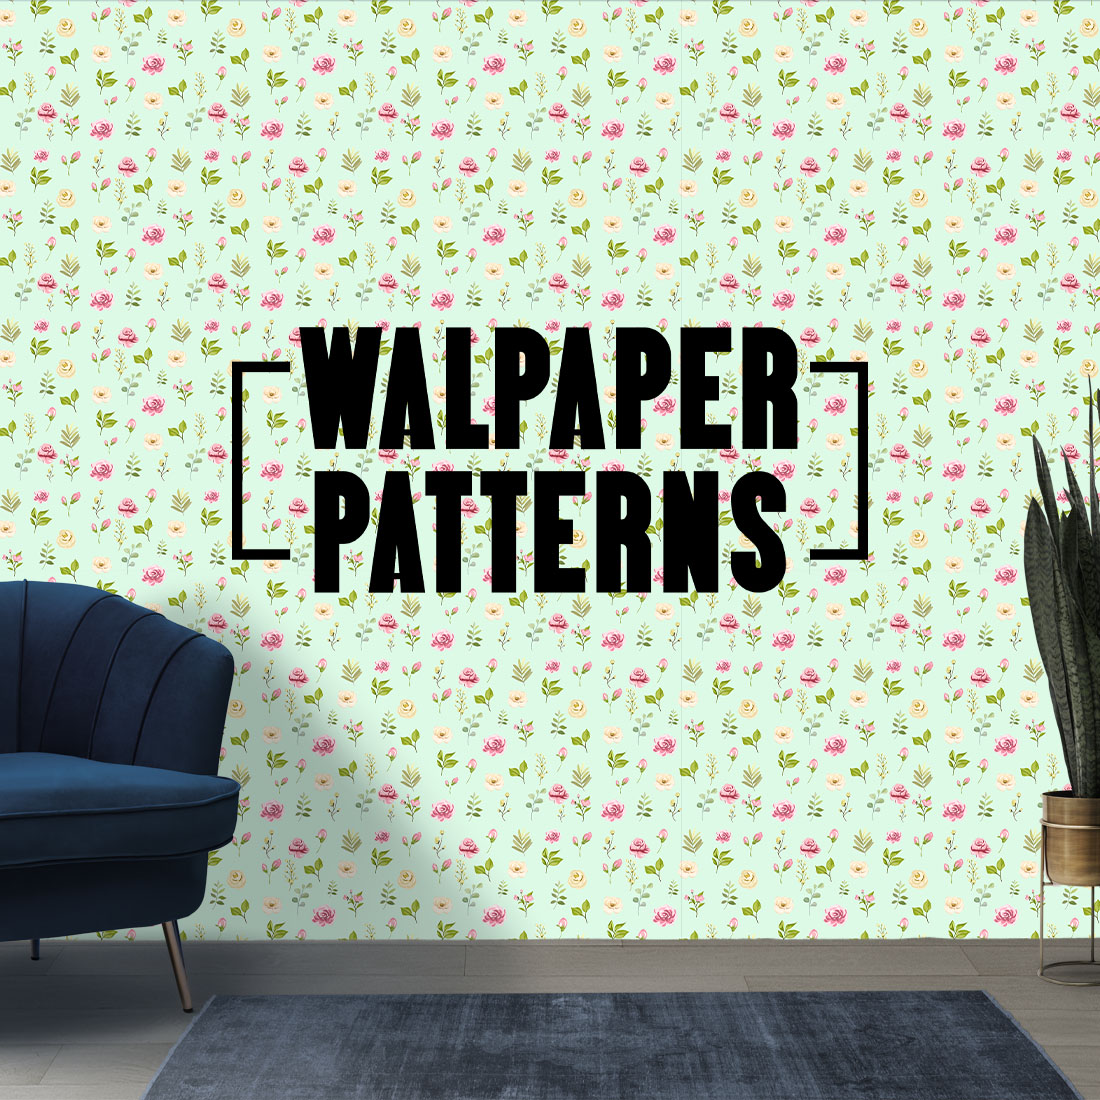 Floral Seamless Patterns preview image.